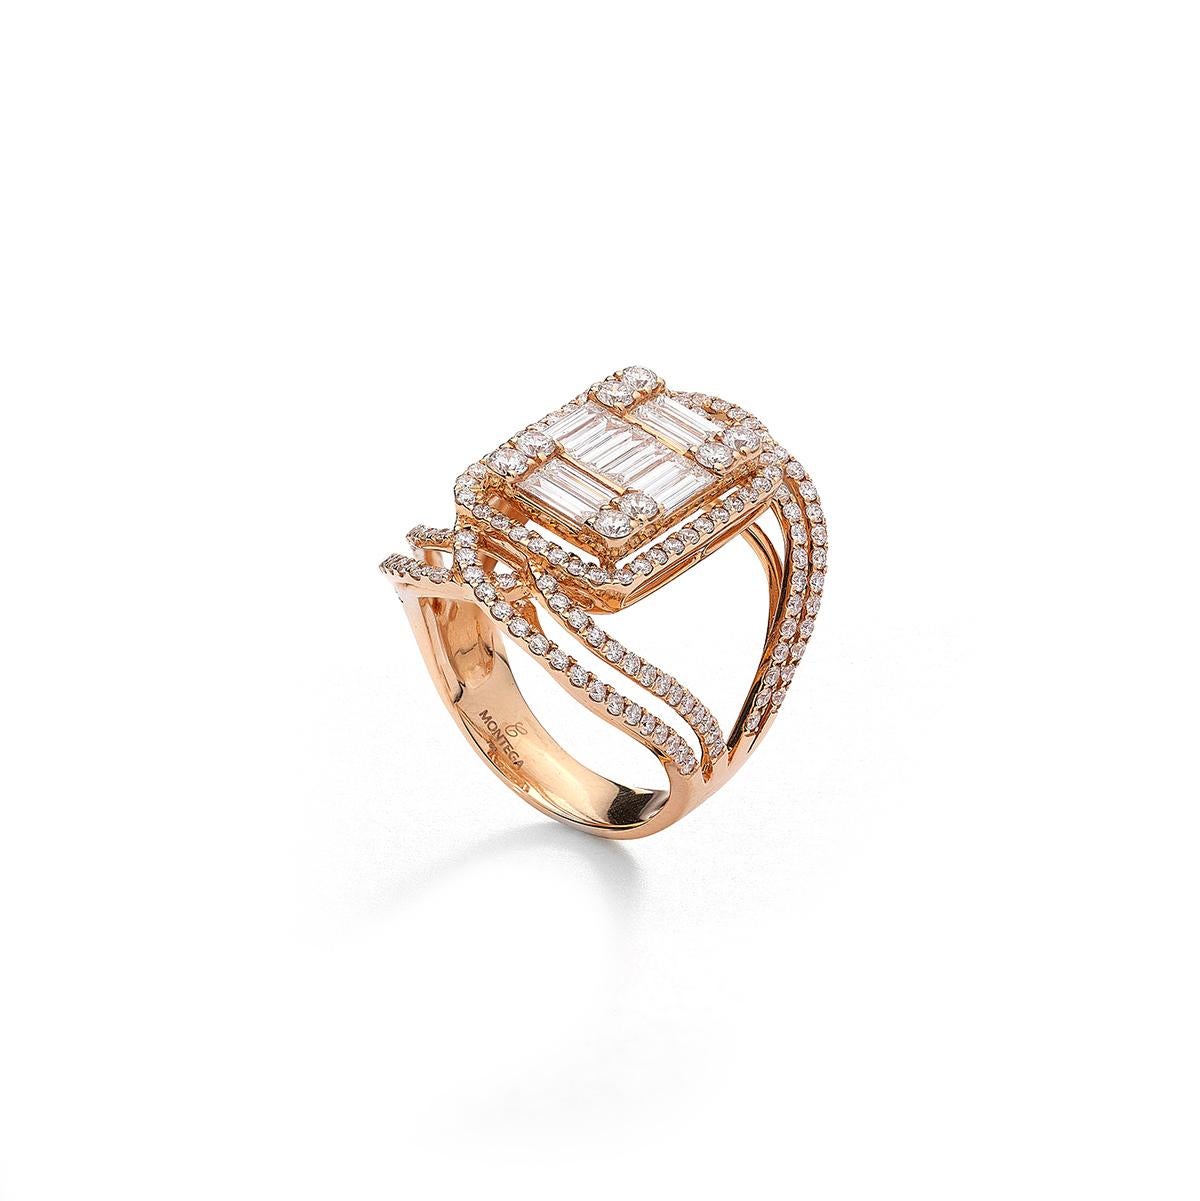 Ring in 18kt pink gold set with 10 baguette cut diamonds 0.87 cts and 156 diamonds 1.47 cts Size 54